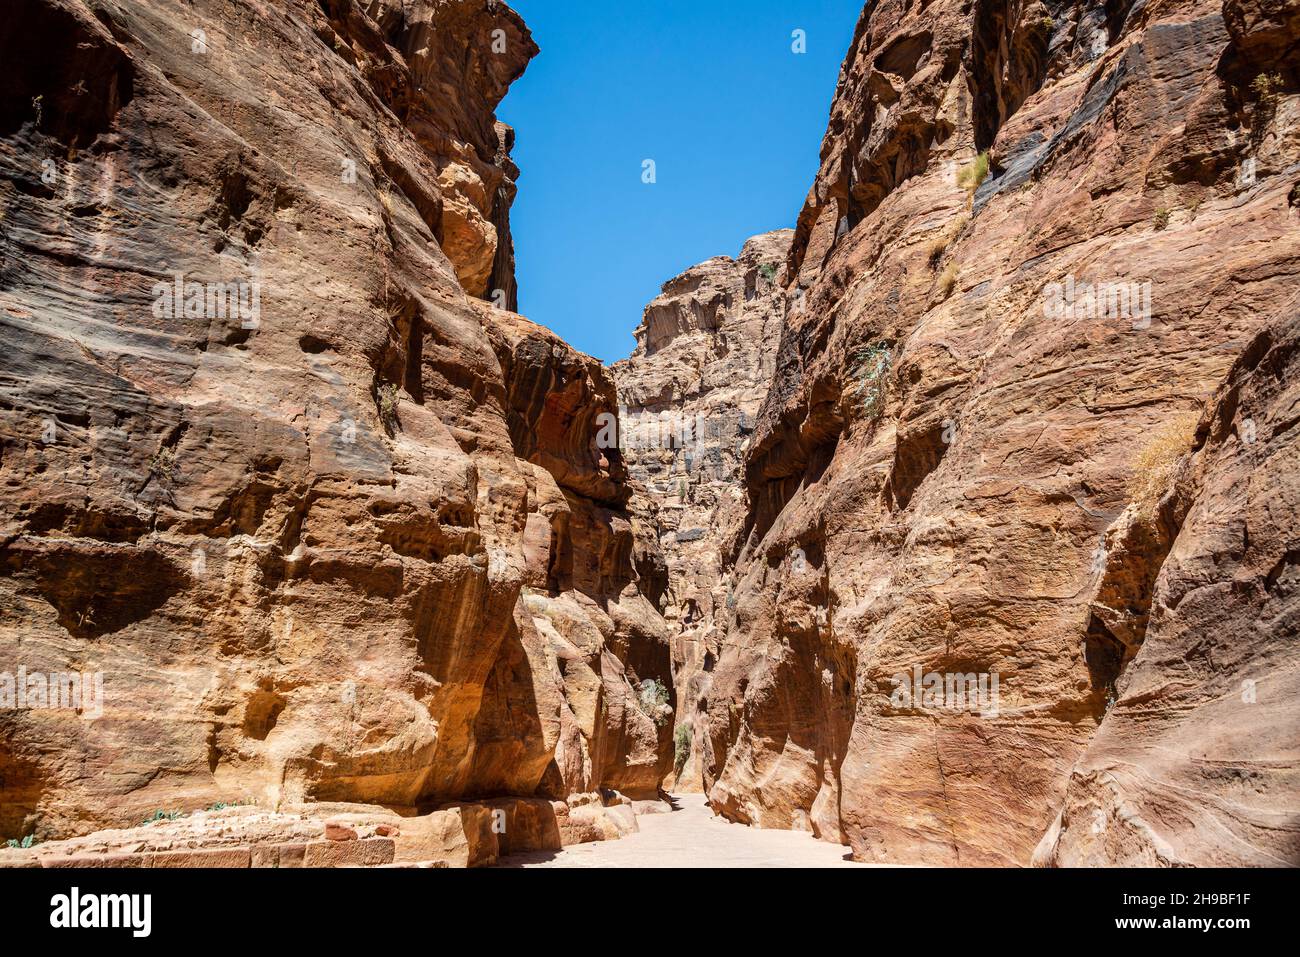 View of the Siq leading to the entrance of Petra, Jordan Stock Photo